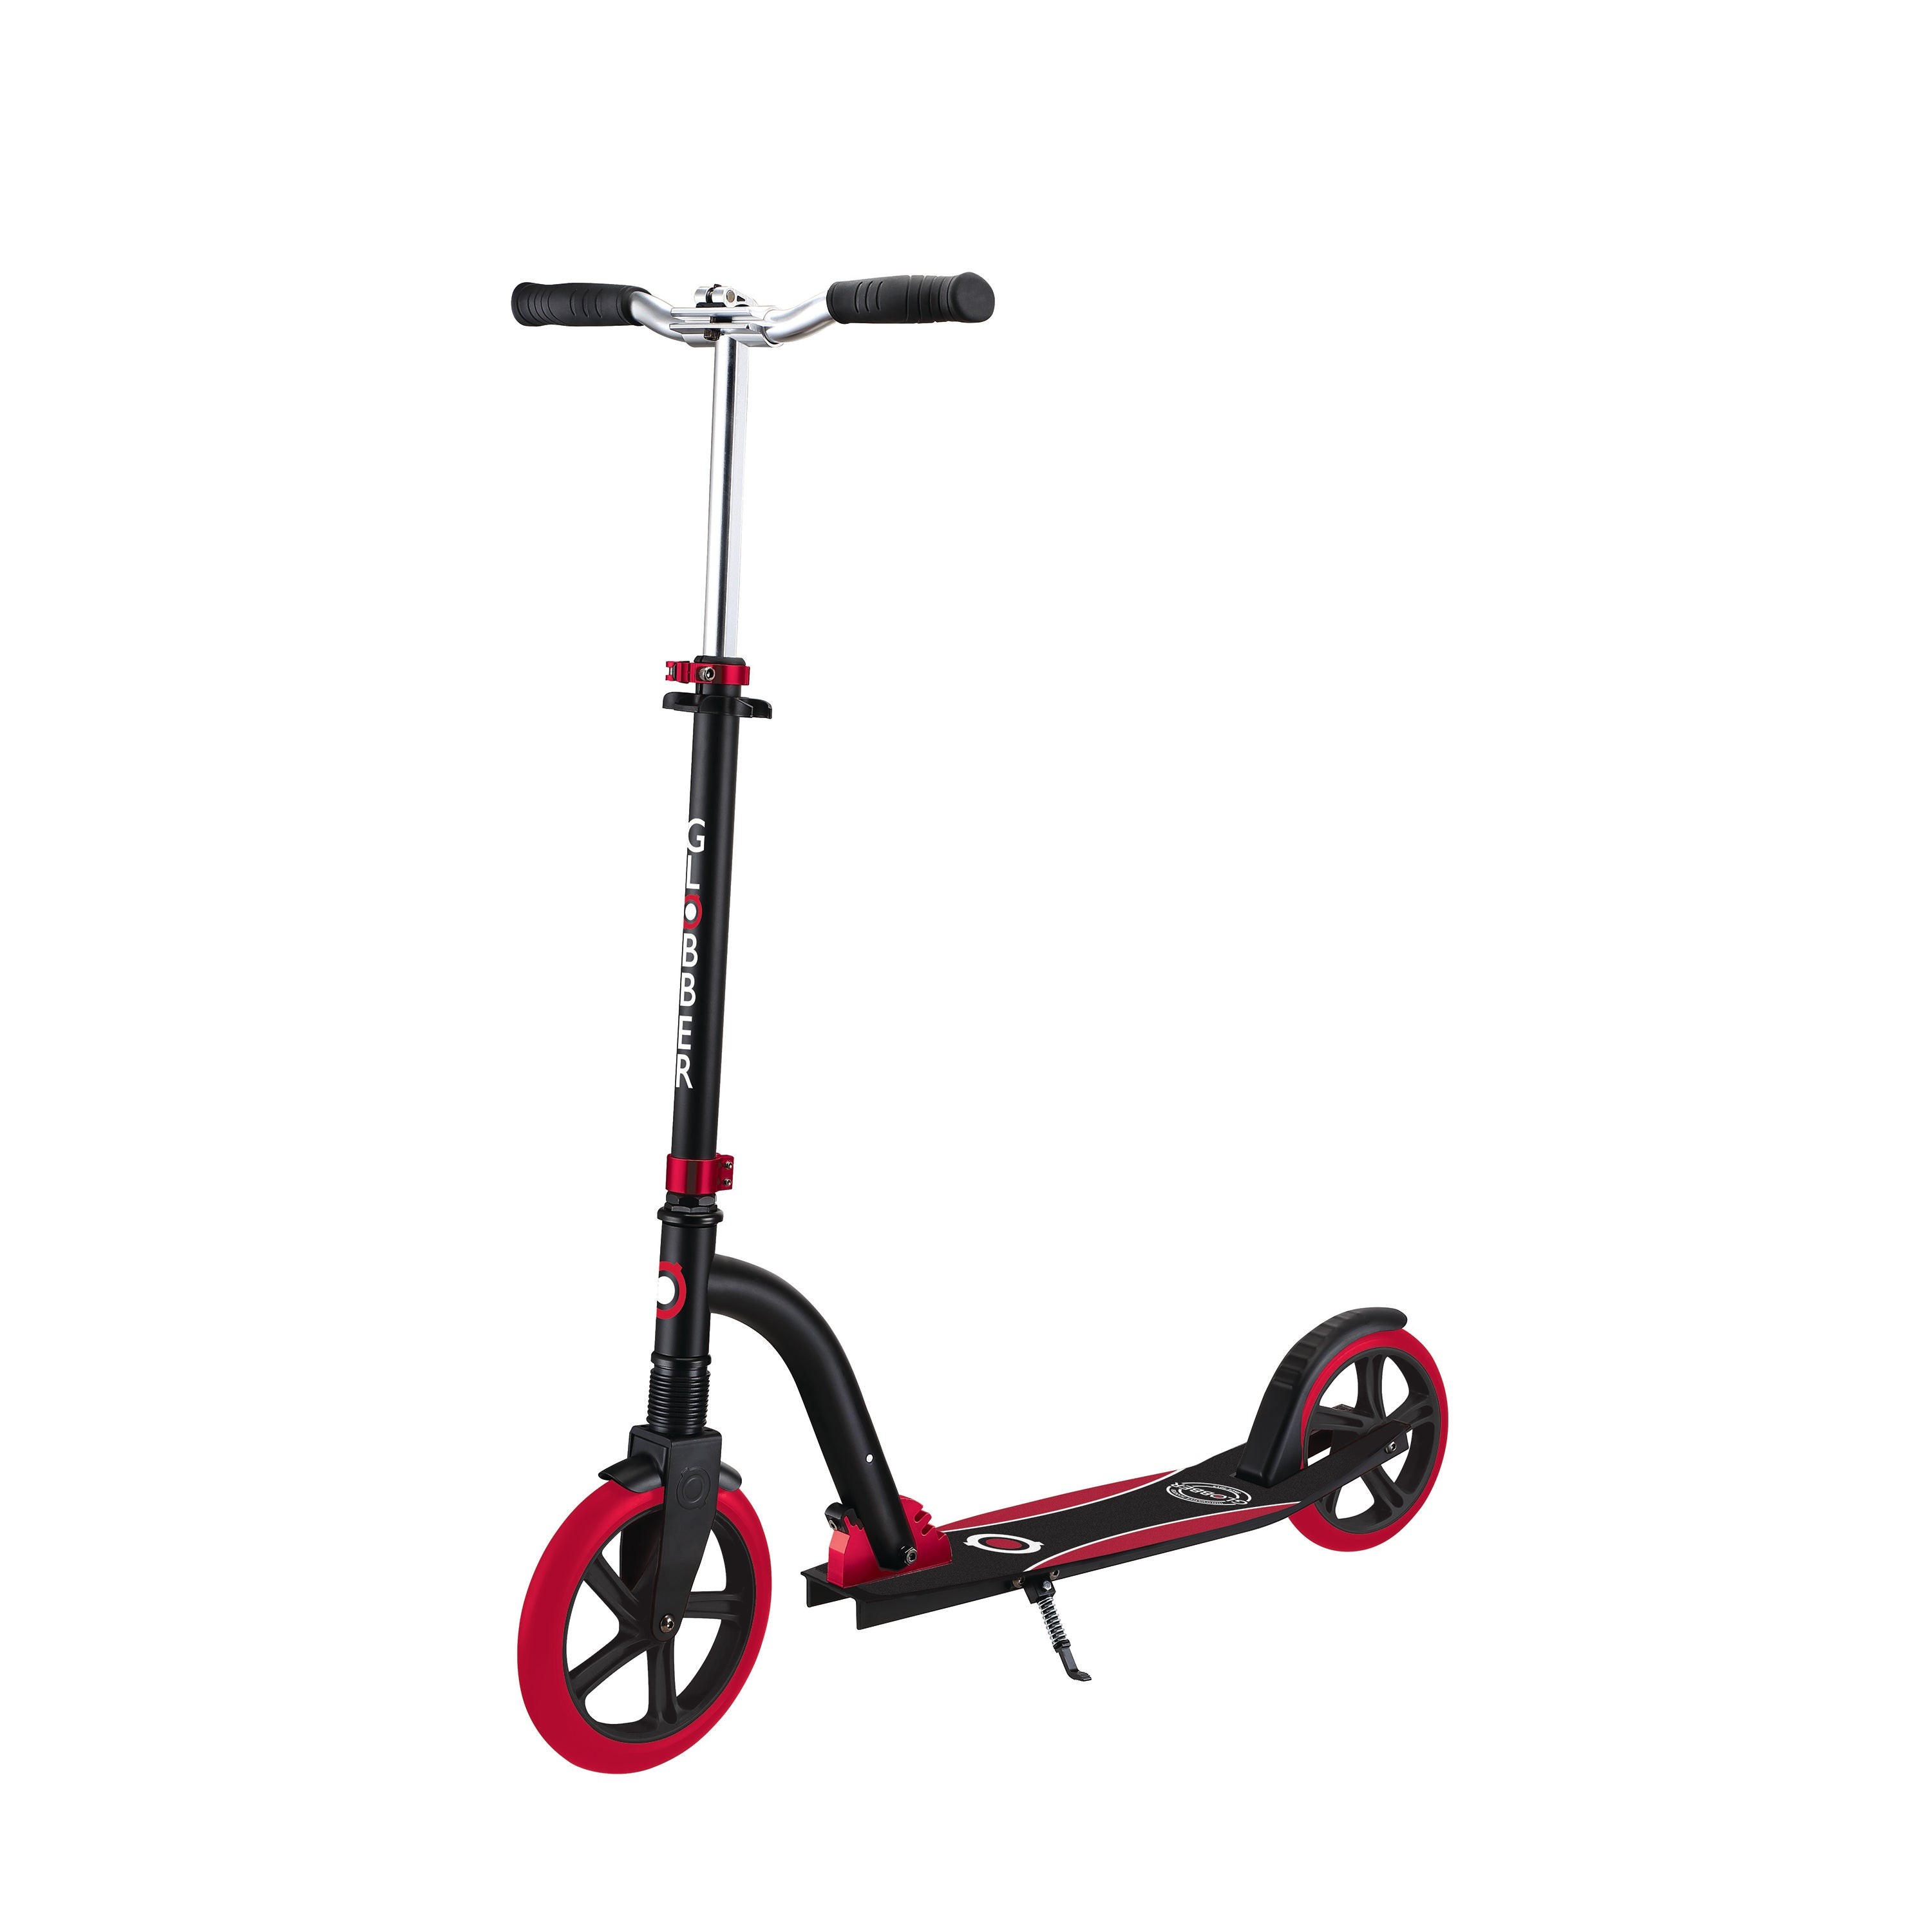 NL 230-205 Duo Big Wheel Folding Scooter - Ages 14+ Years Red